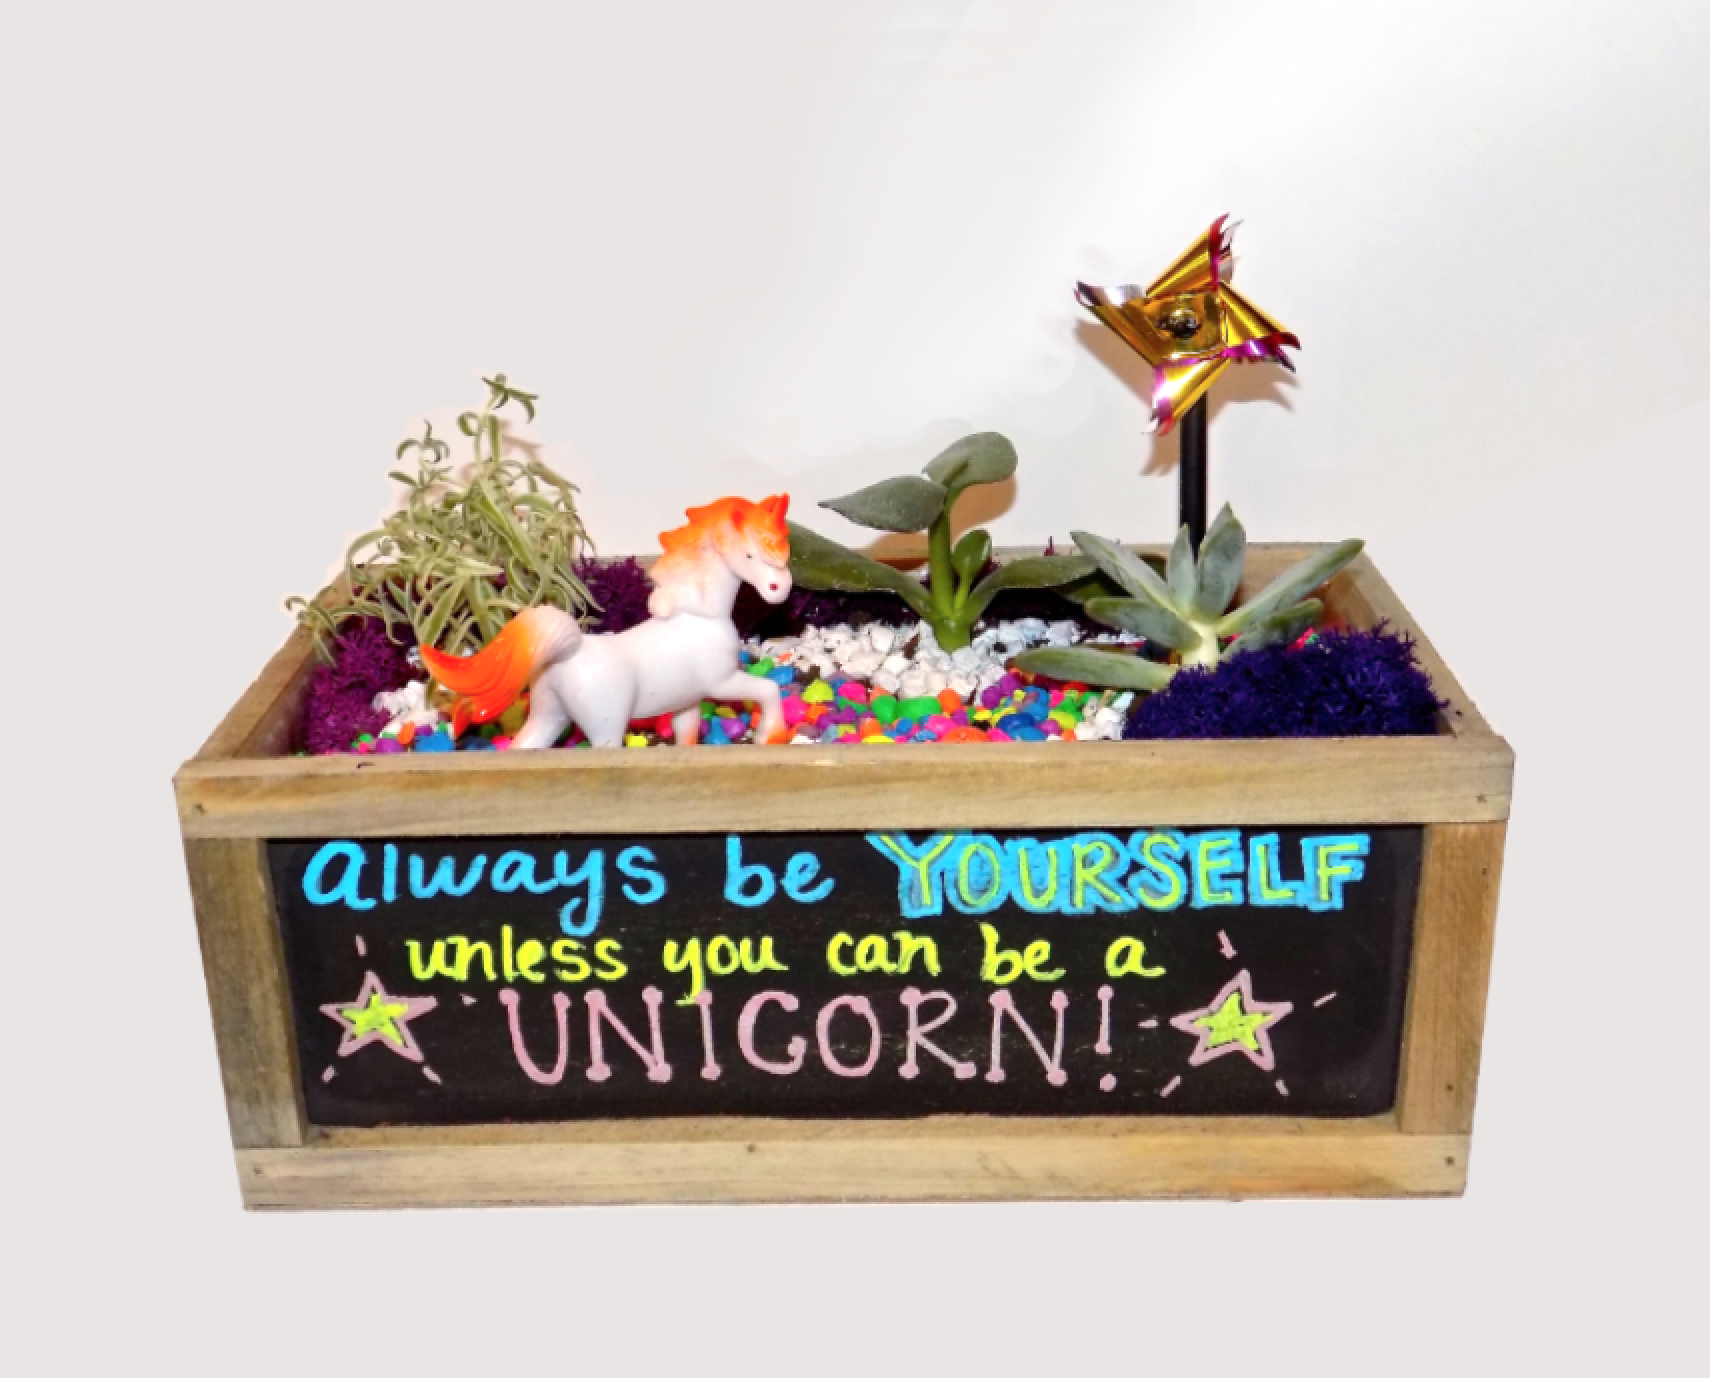 A Unicorn Succulent Garden in Chalkboard Container plant nite project by Yaymaker